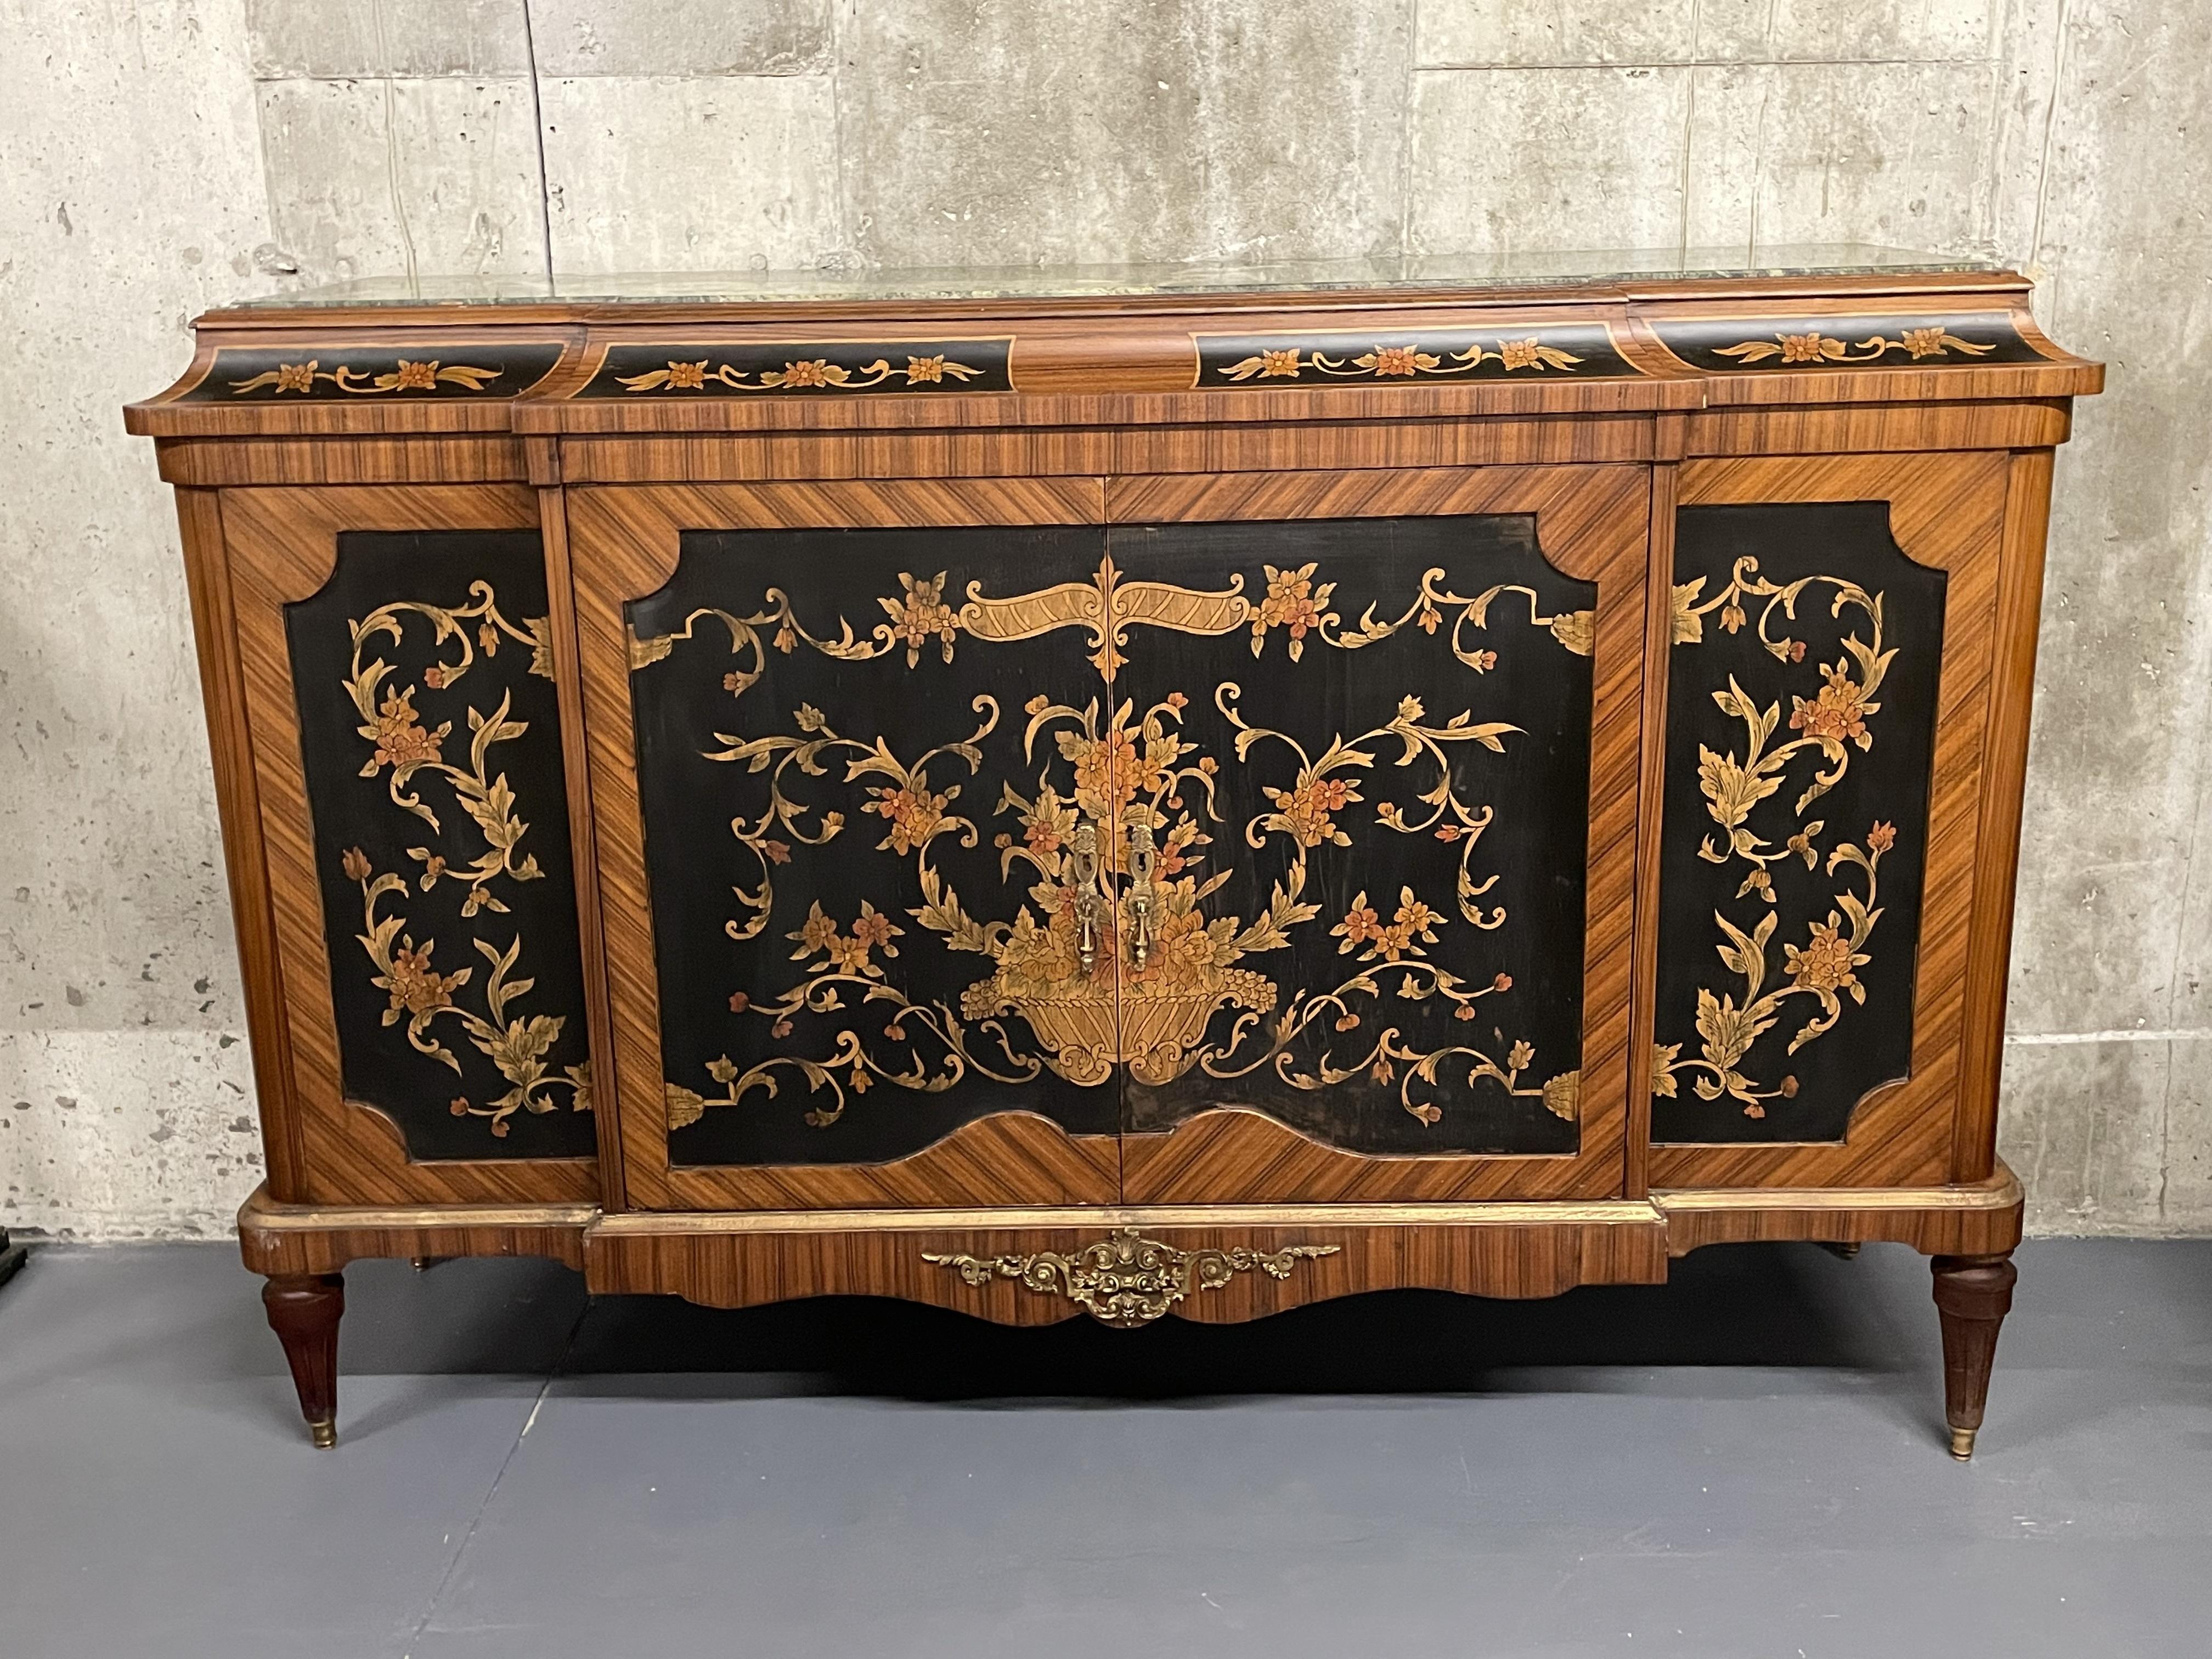 20th Century Louis XVI Style Inlaid Server, Buffet or Console, Bronze Mounted, Inlaid